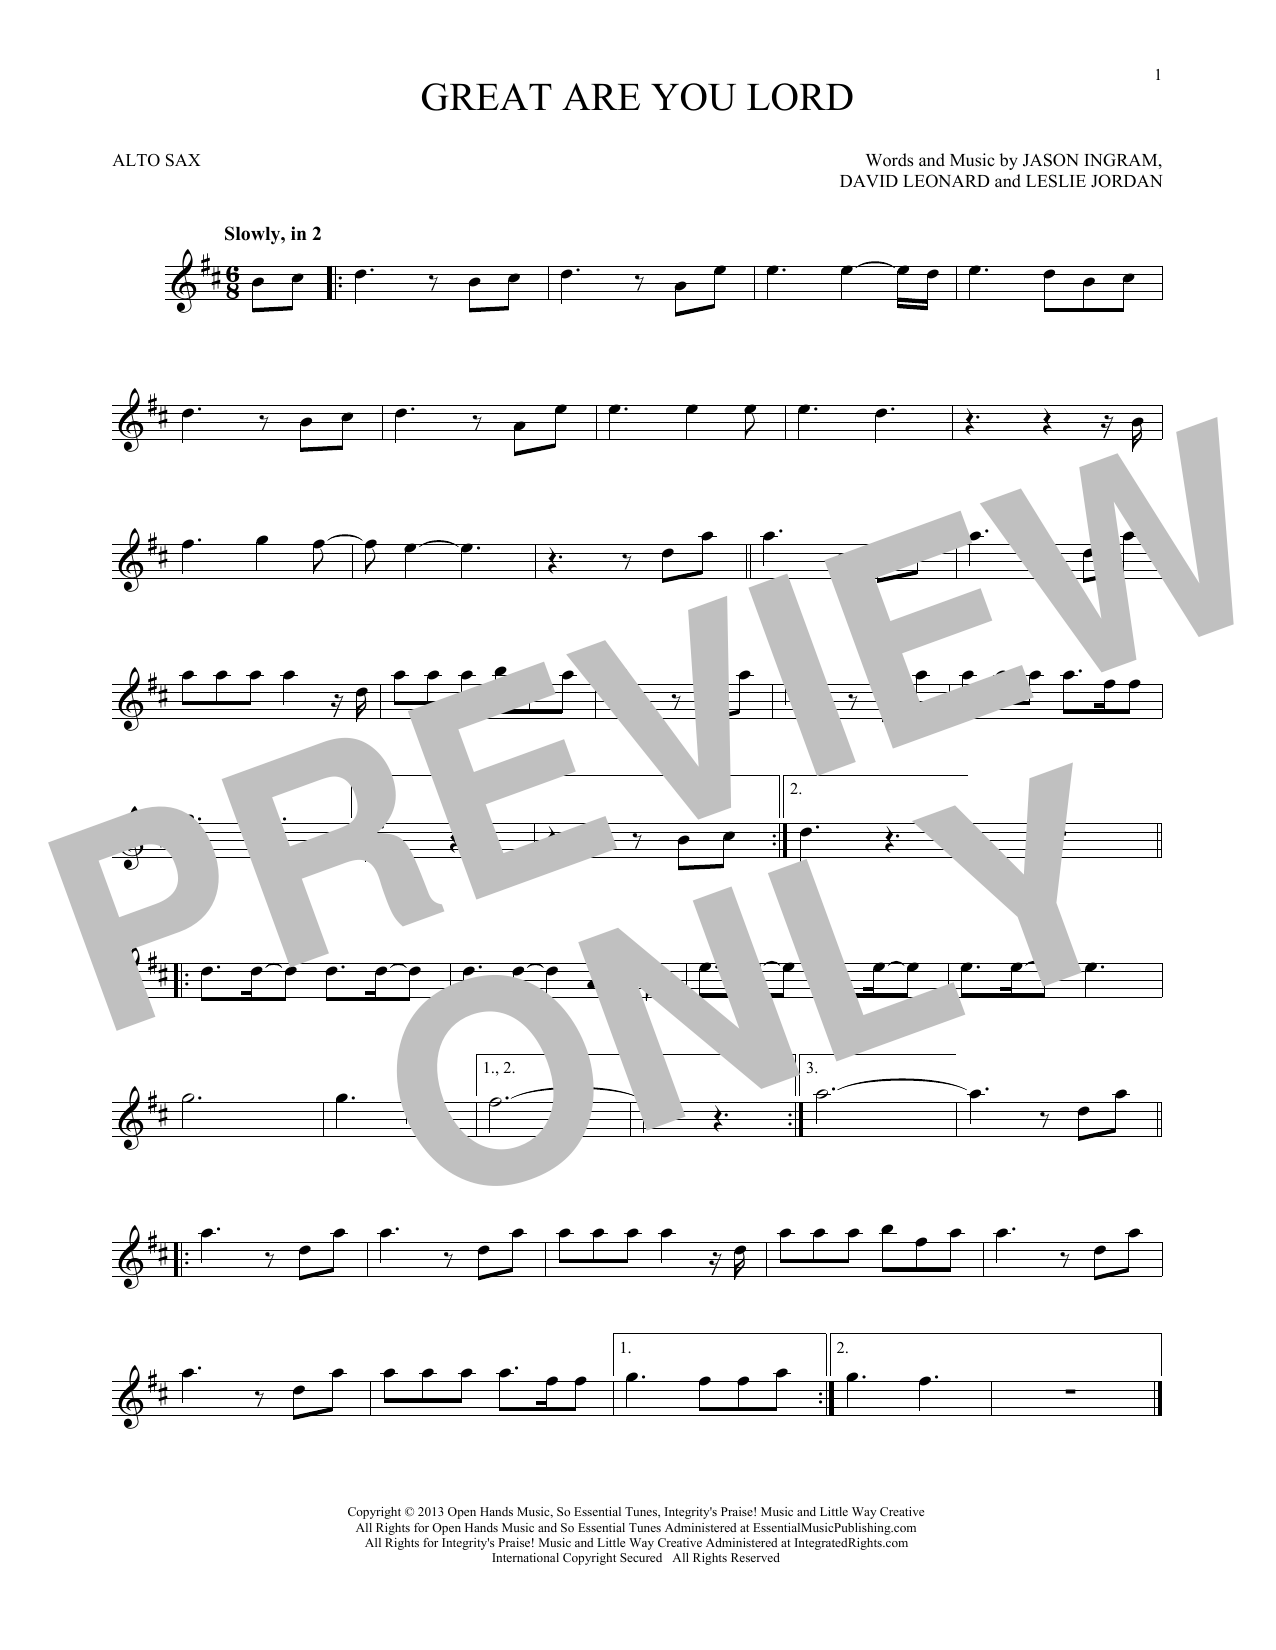 All Sons & Daughters Great Are You Lord sheet music notes printable PDF score